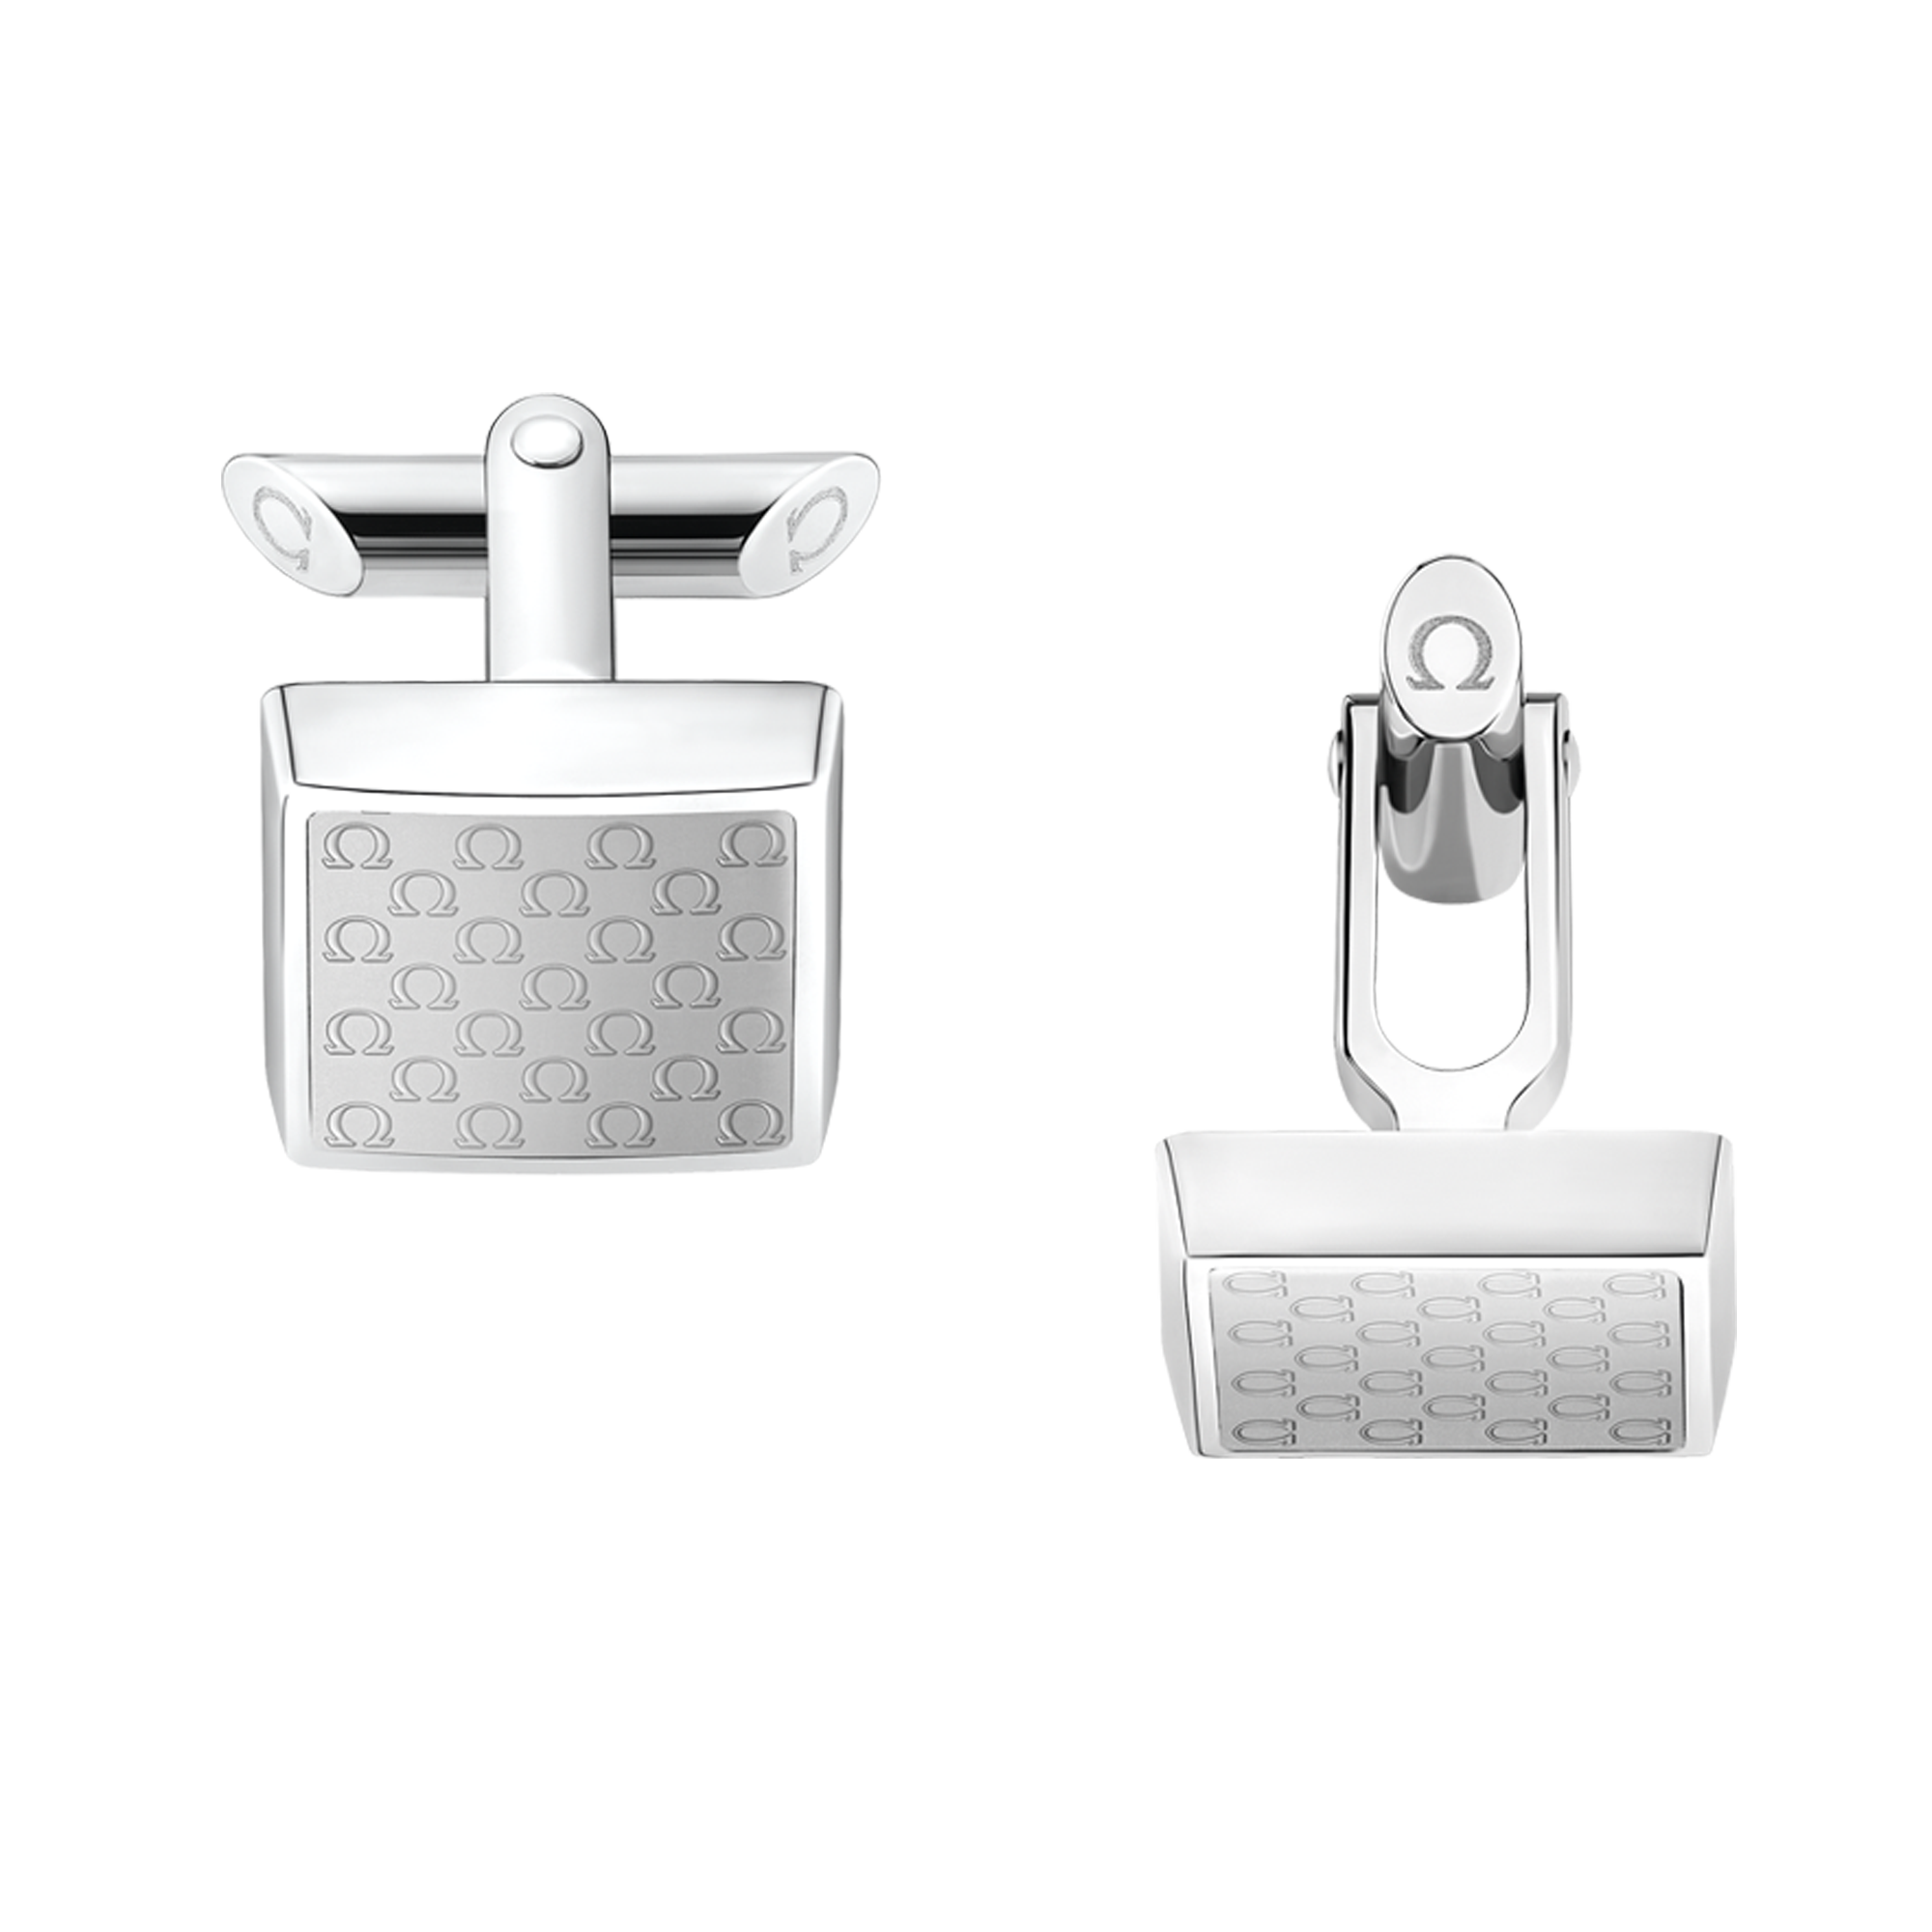 Omegamania Cufflinks, Stainless steel, Translucent resin - CA02ST0000105